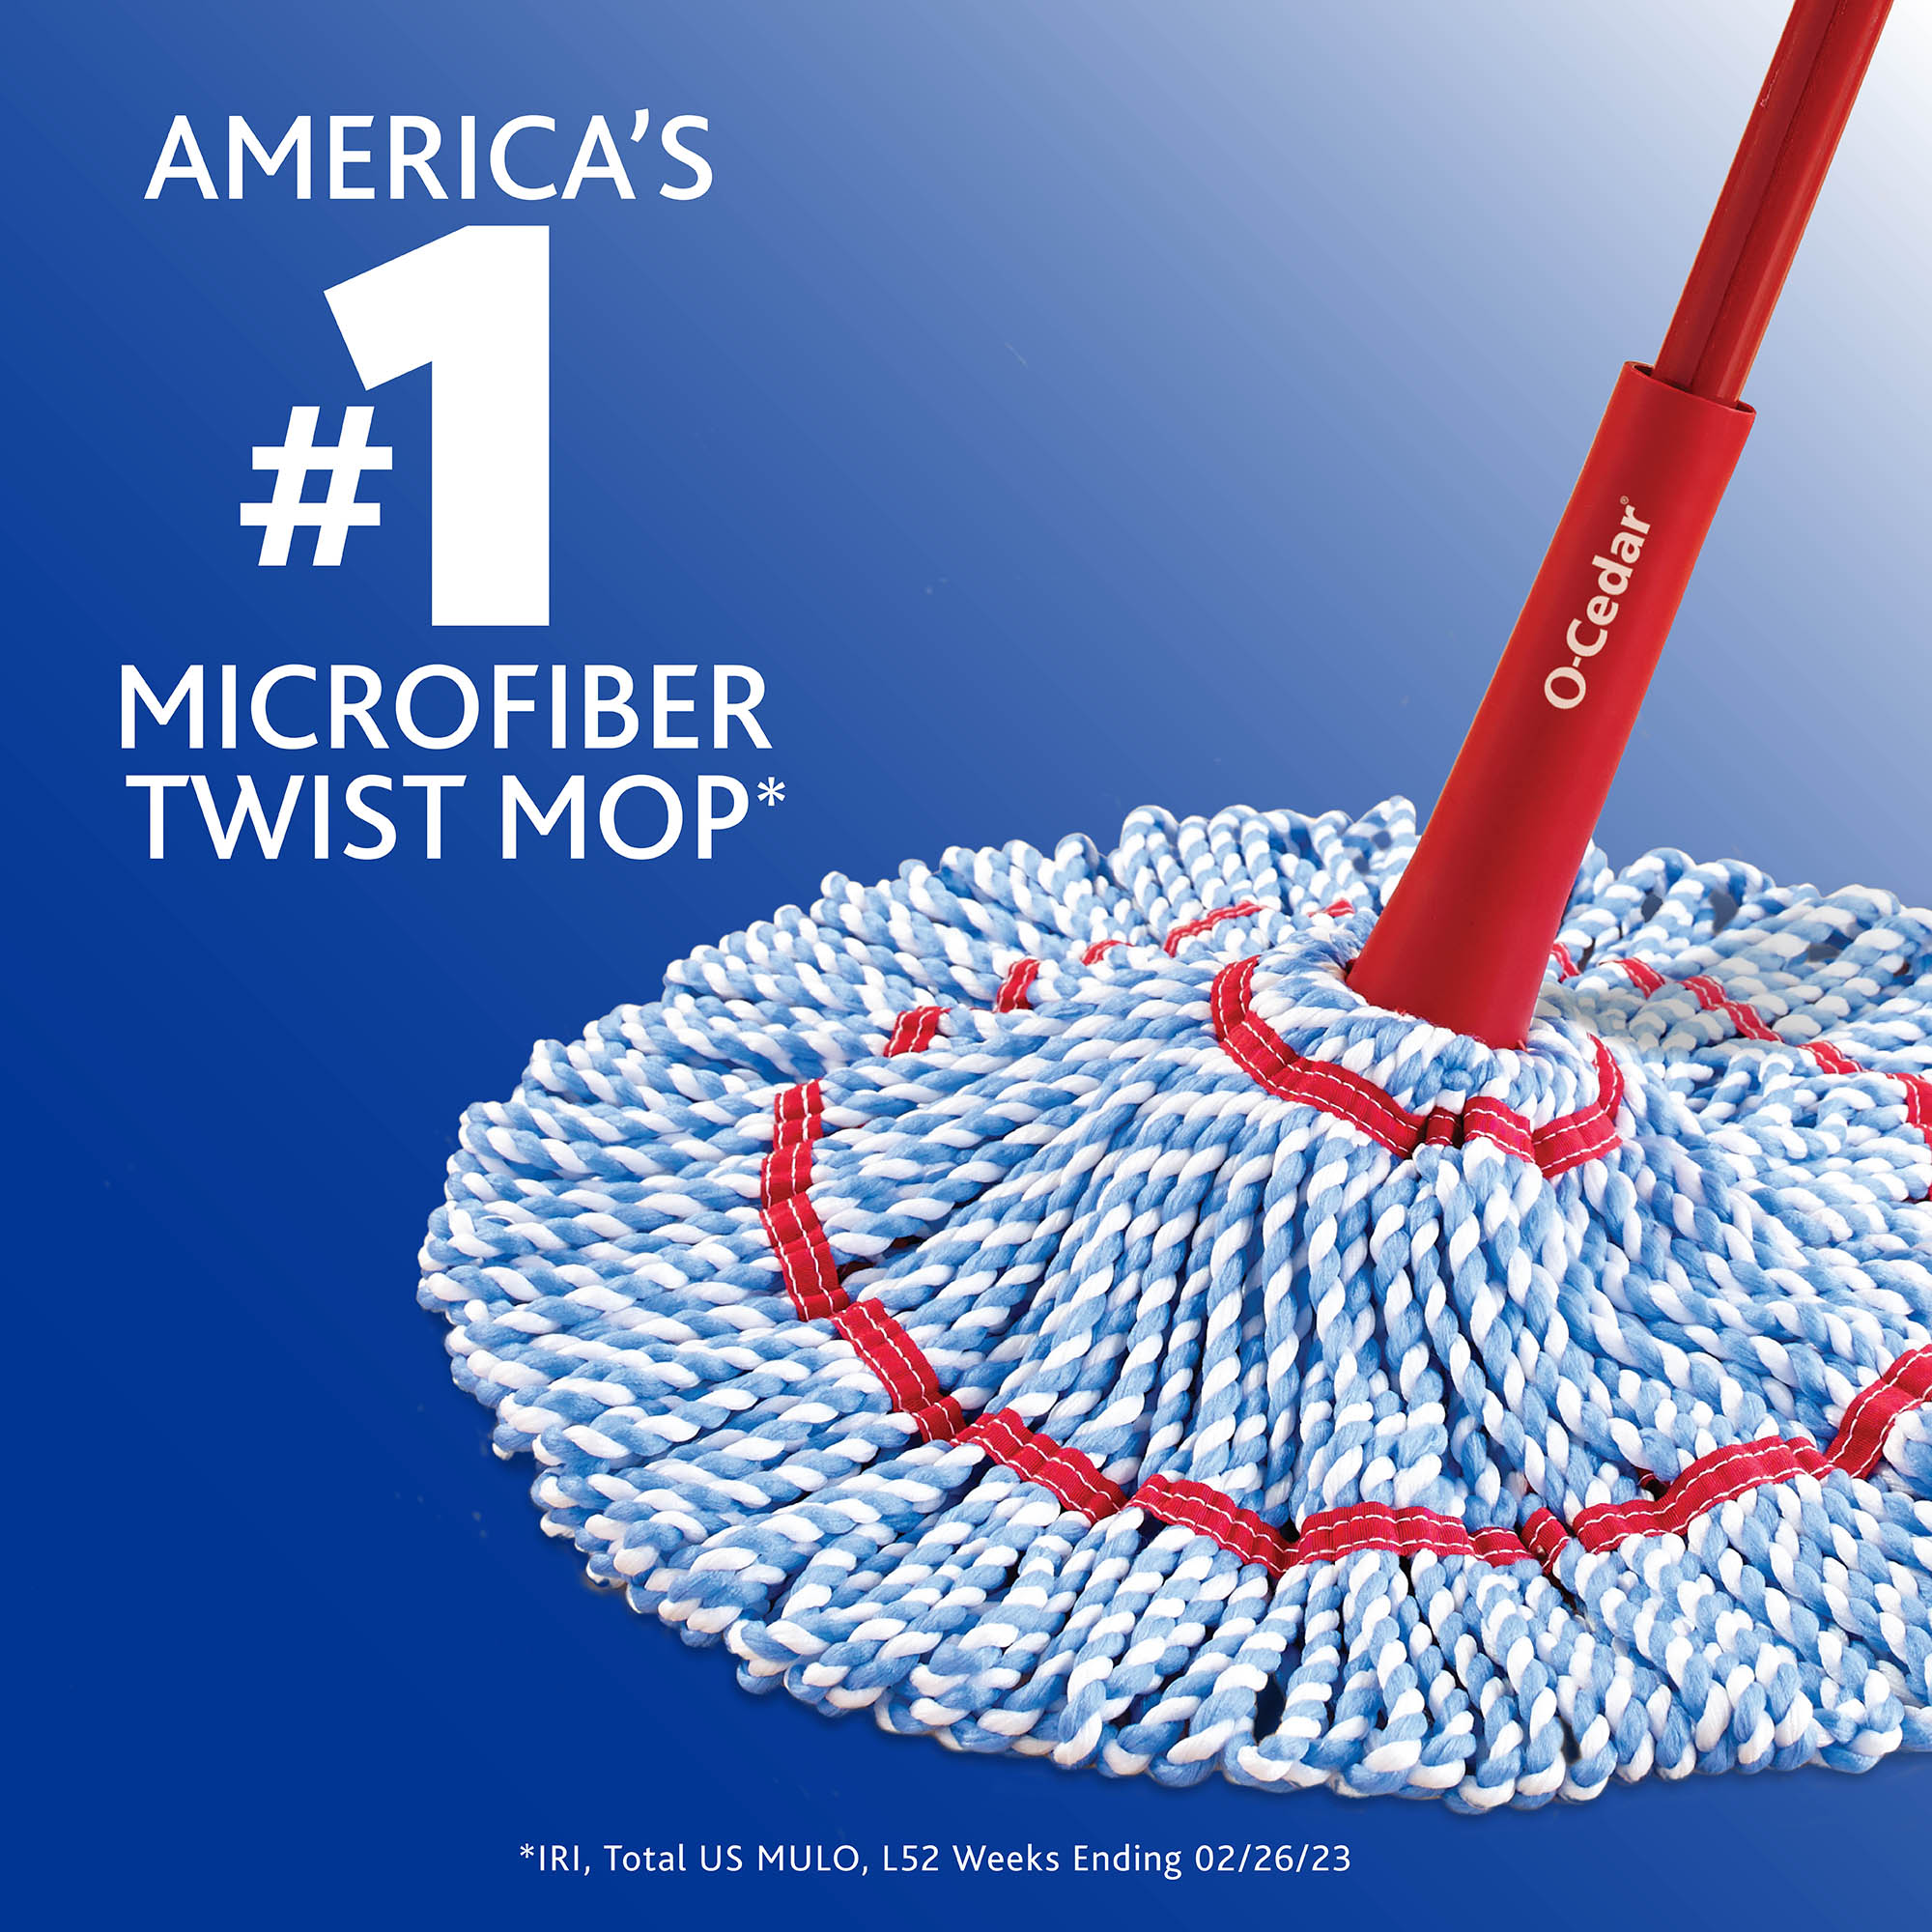 O-Cedar MicroTwist™ MAX Microfiber Mop, Removes 99% of Bacteria with Just Water - image 5 of 18